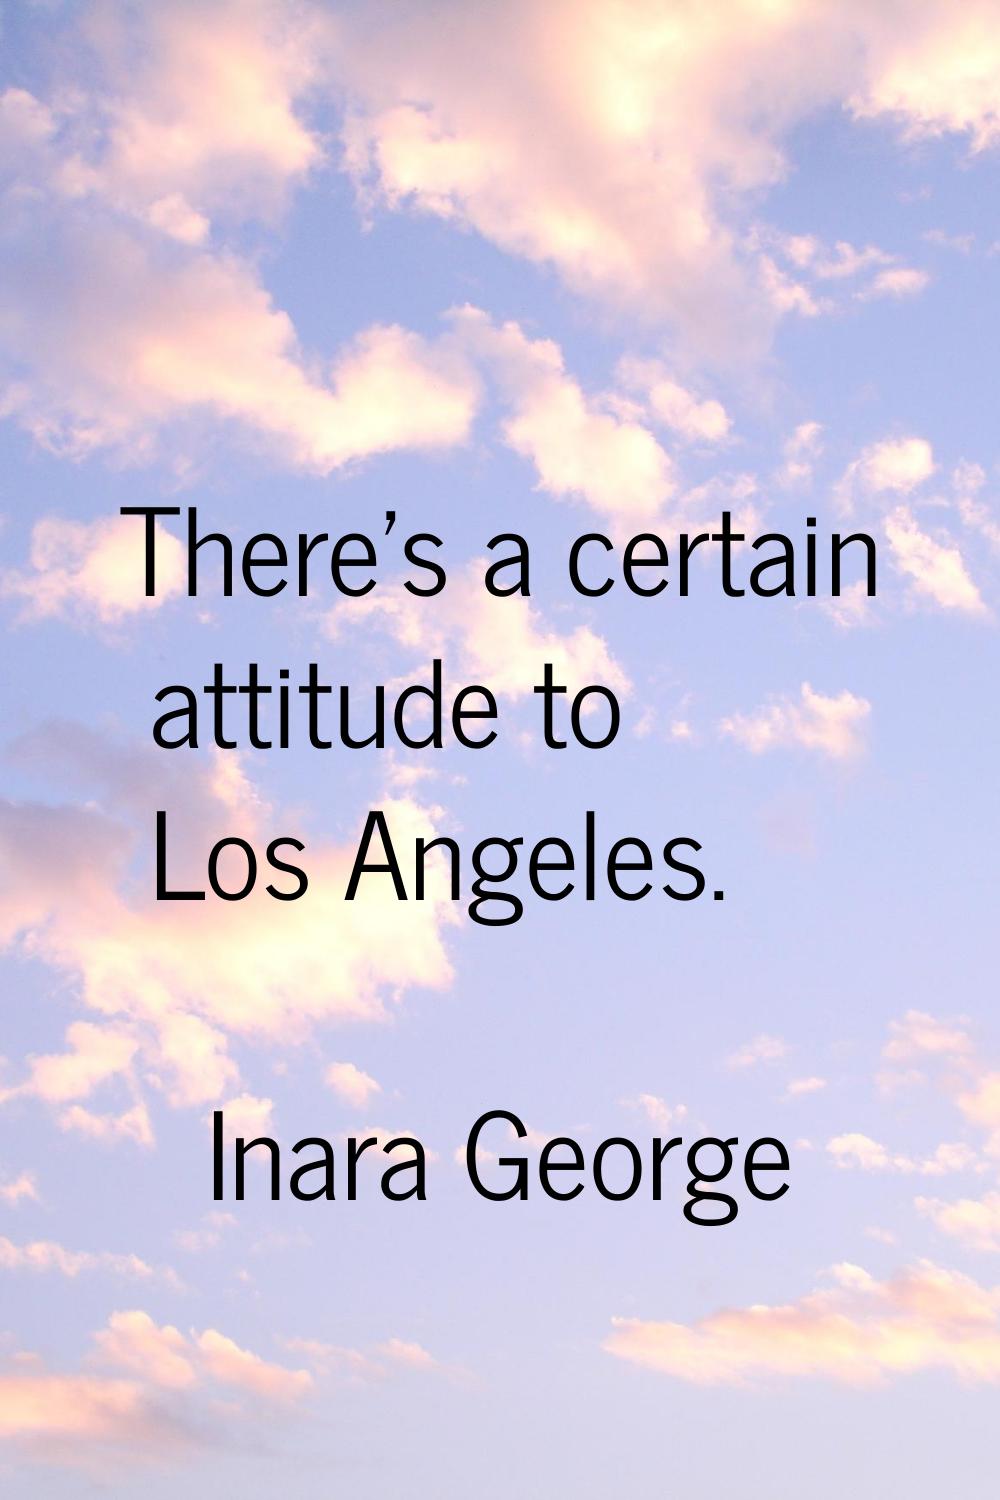 There's a certain attitude to Los Angeles.